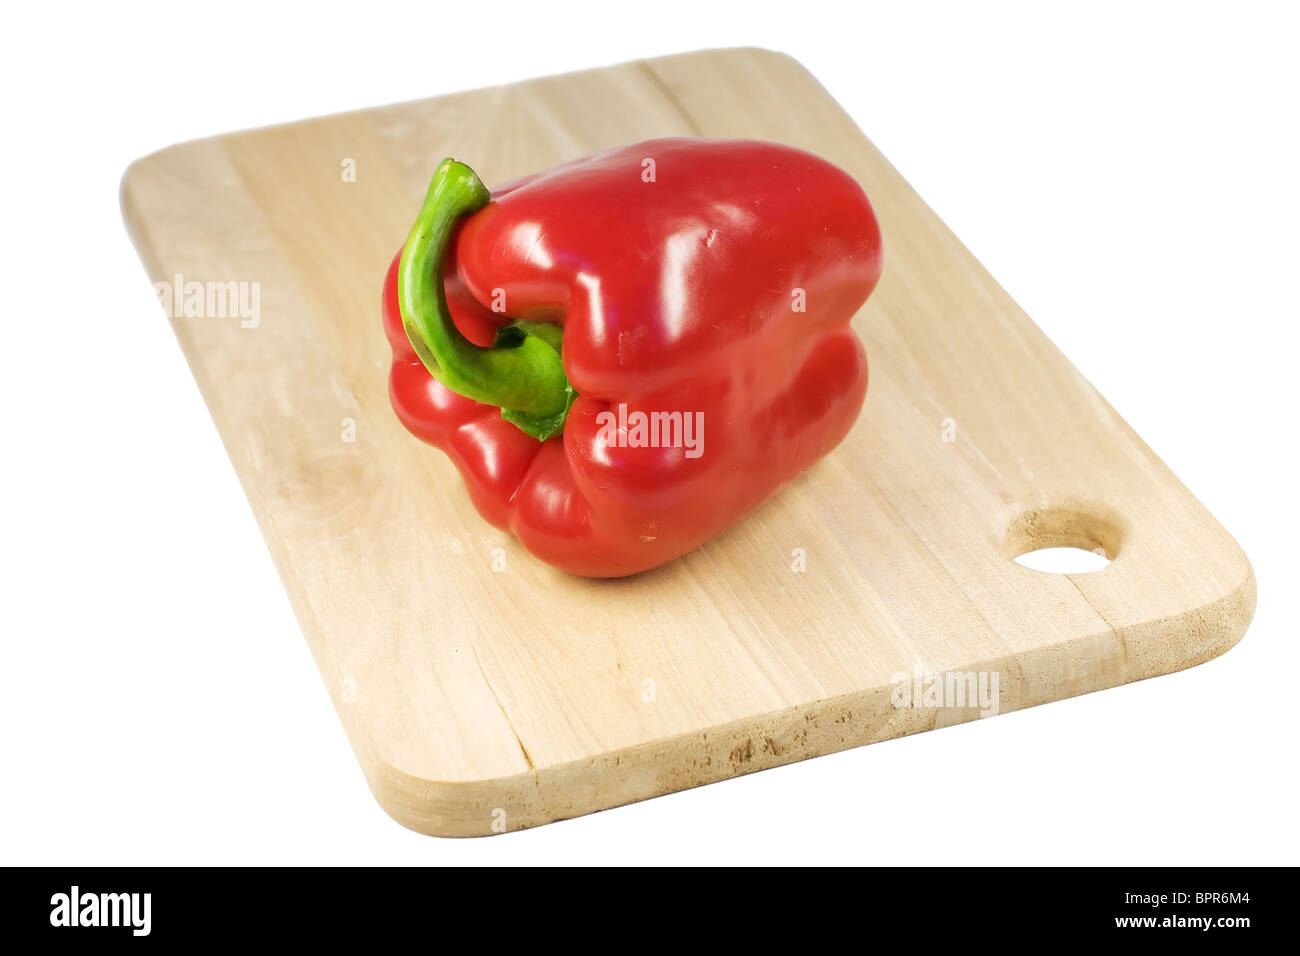 Red pepper on a wooden cutting board. Stock Photo